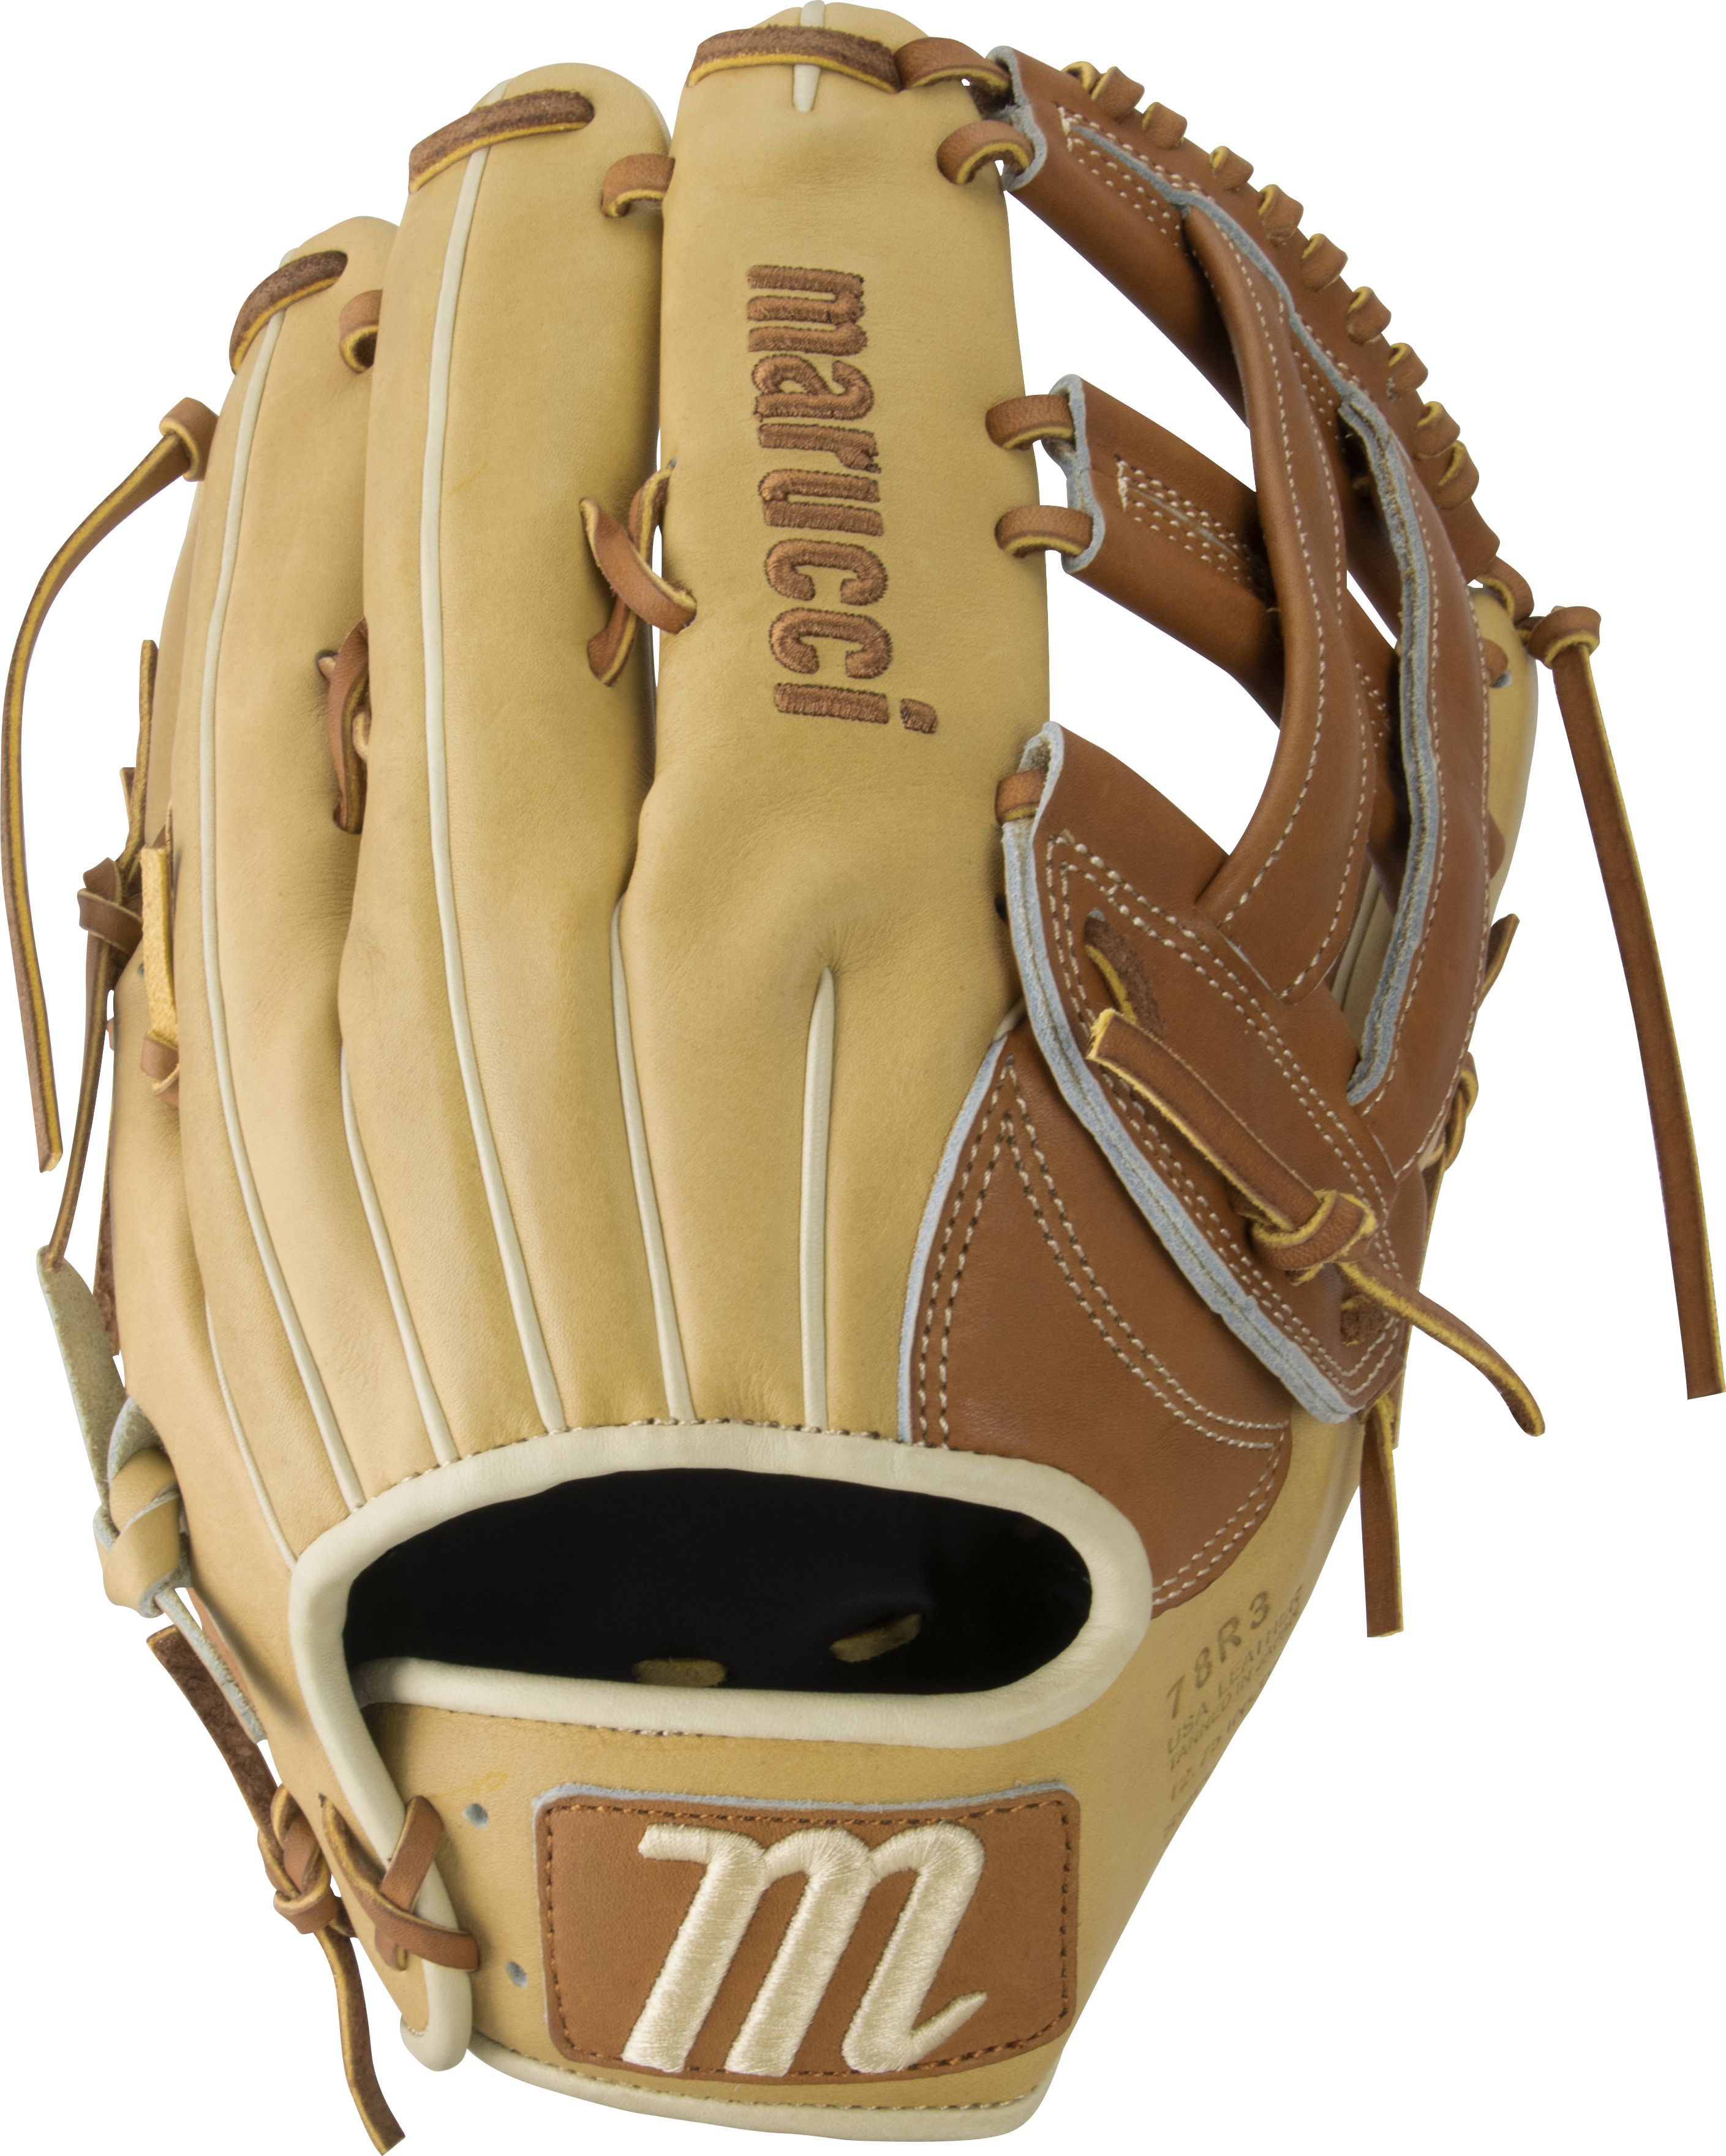 marucci-cypress-12-75-baseball-glove-78r3-12-75-h-web-right-hand-throw MFGCY78R3-SMTF-RightHandThrow Marucci  849817099414  • Premium Japanese-tanned steerhide leather provides stiffness and rugged durability •